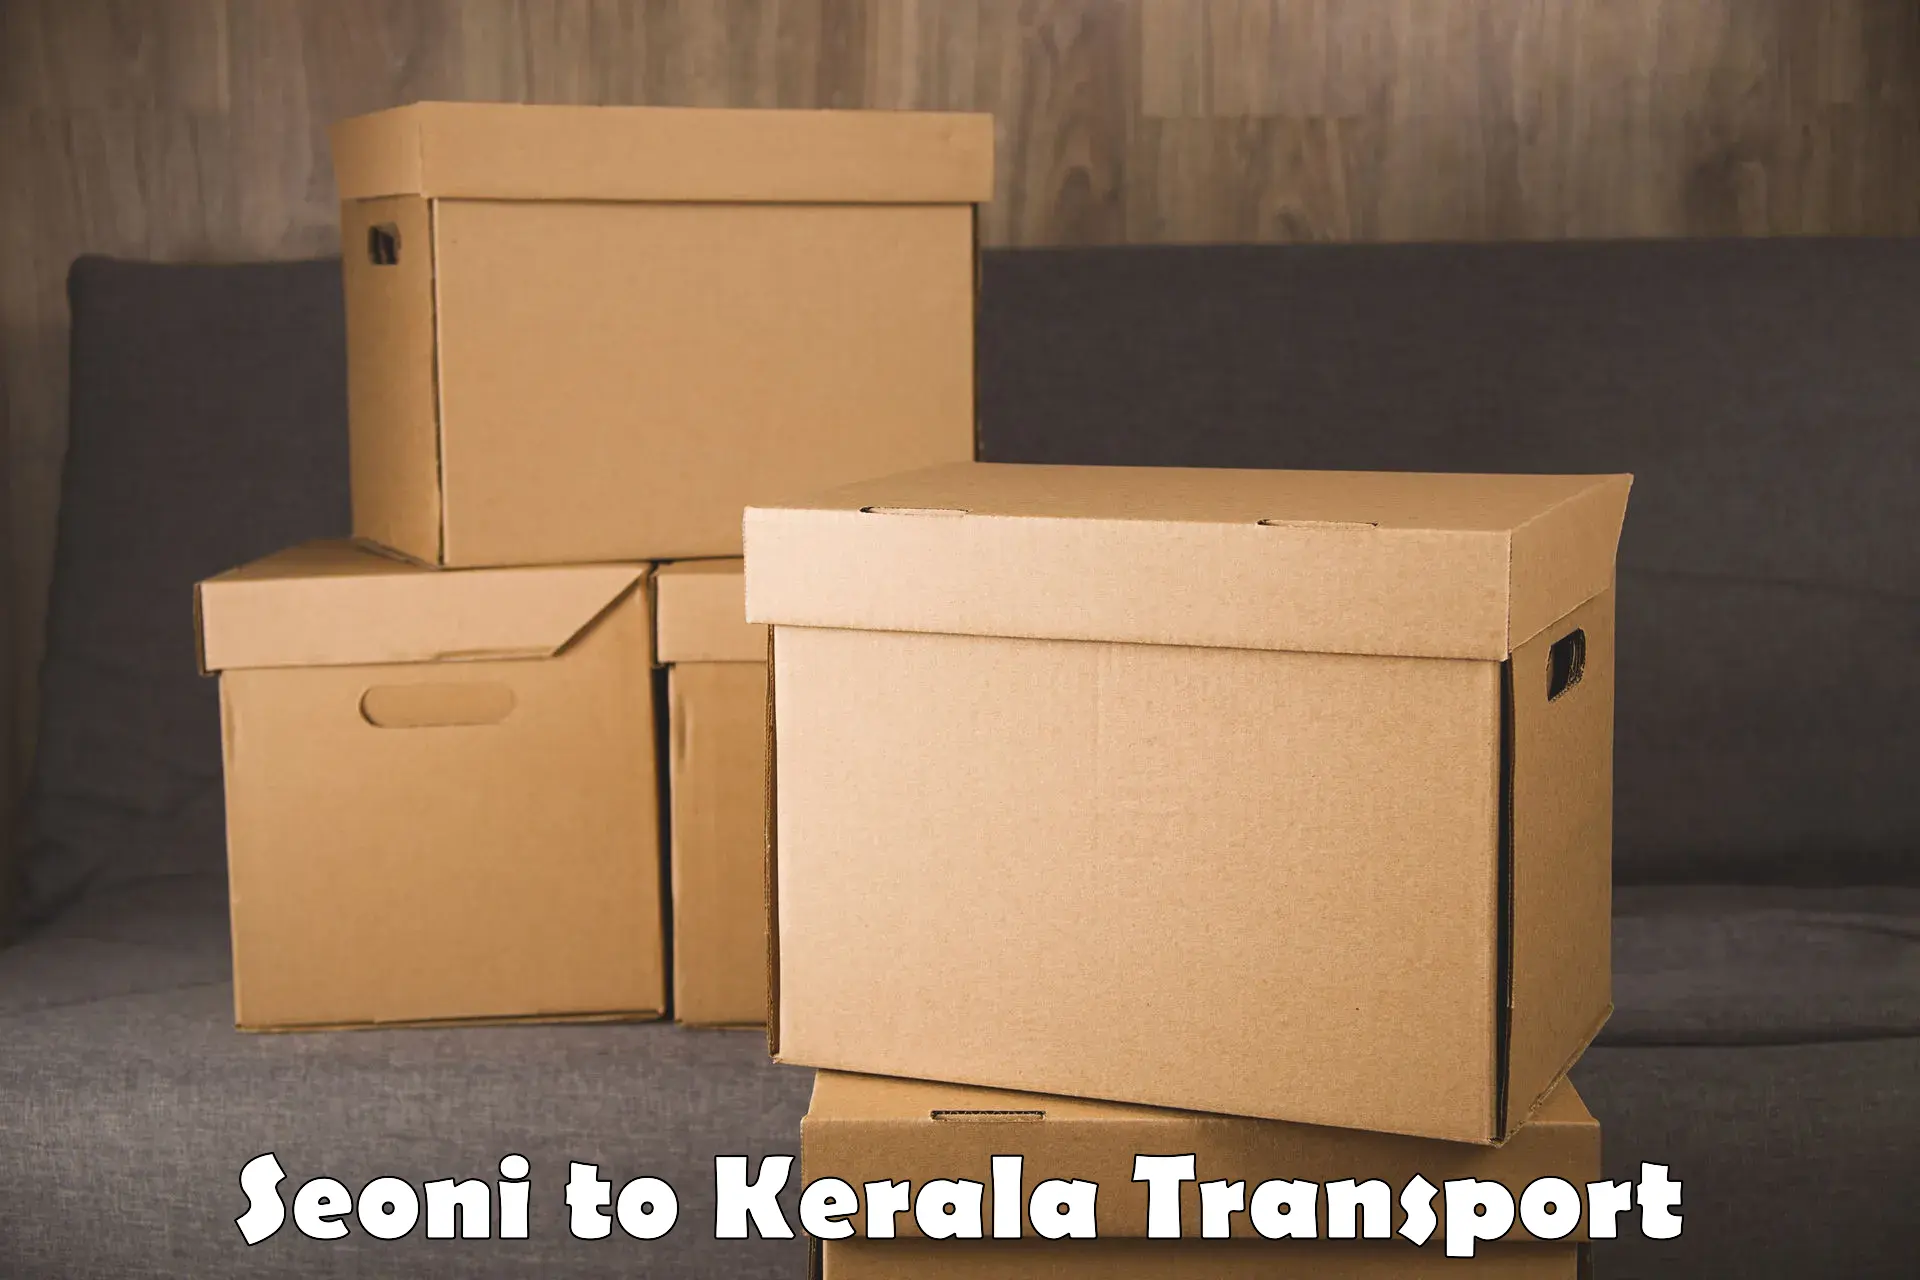 Transport bike from one state to another Seoni to Aluva